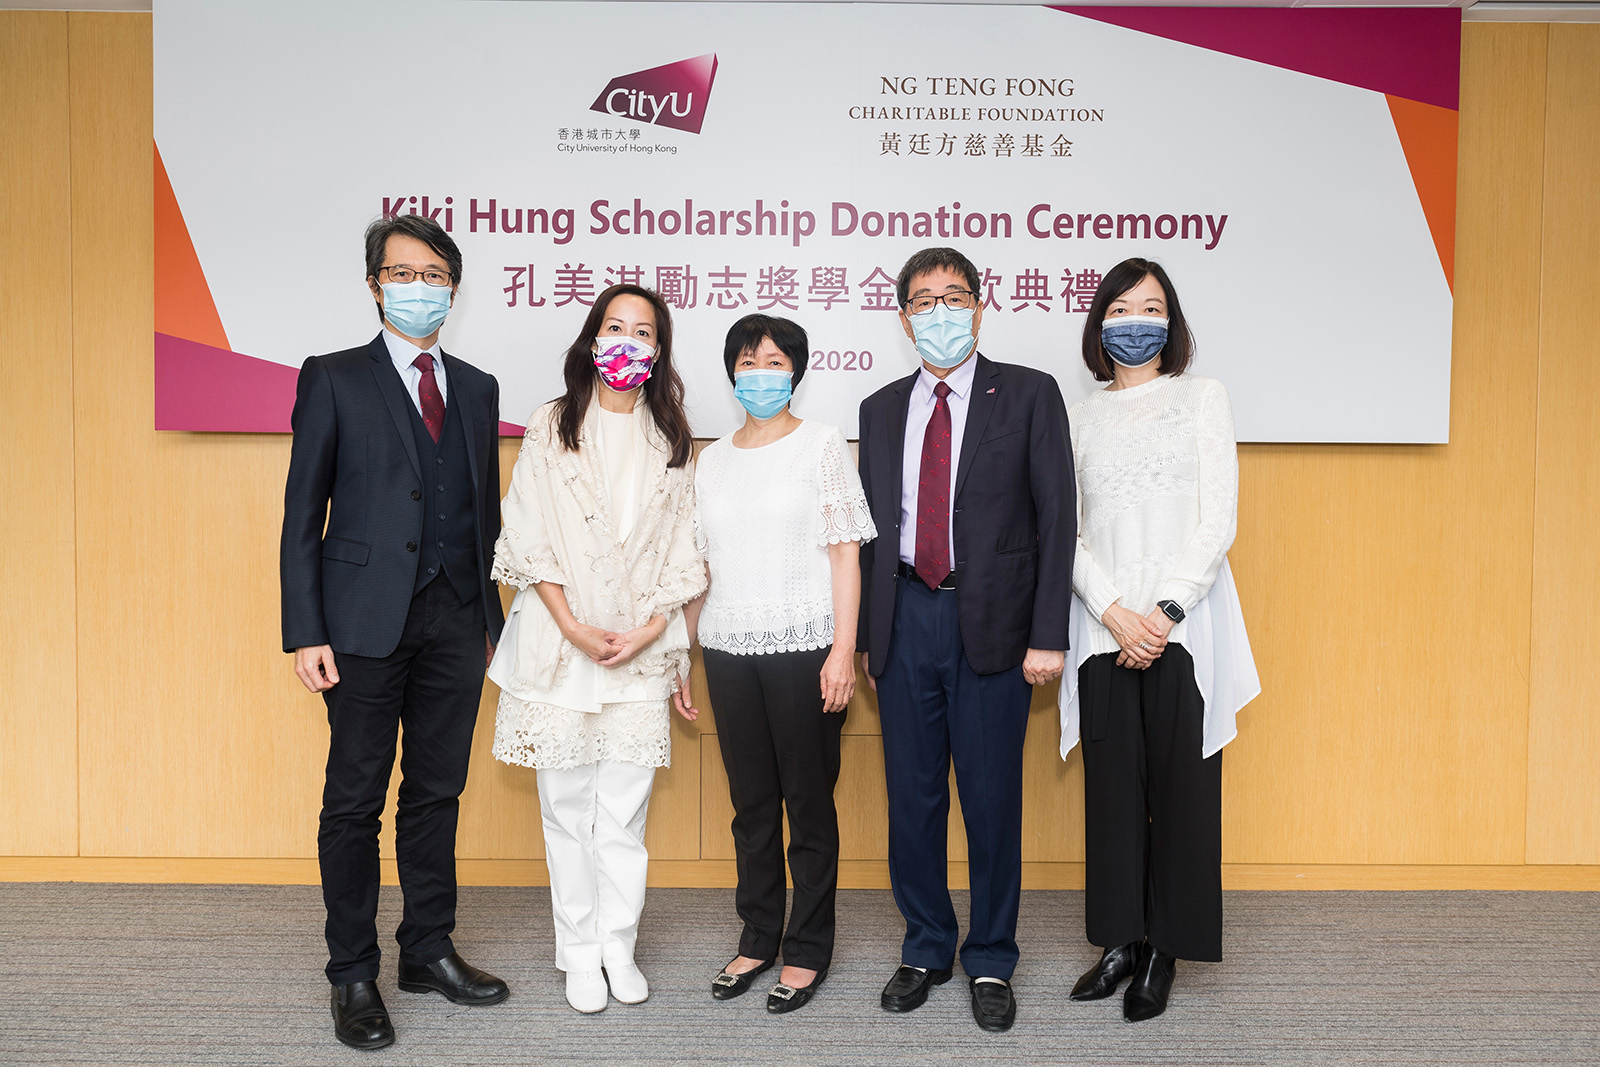 Scholarship donation from Ng Teng Fong Charitable Foundation encourages students to stay positive amid difficulties